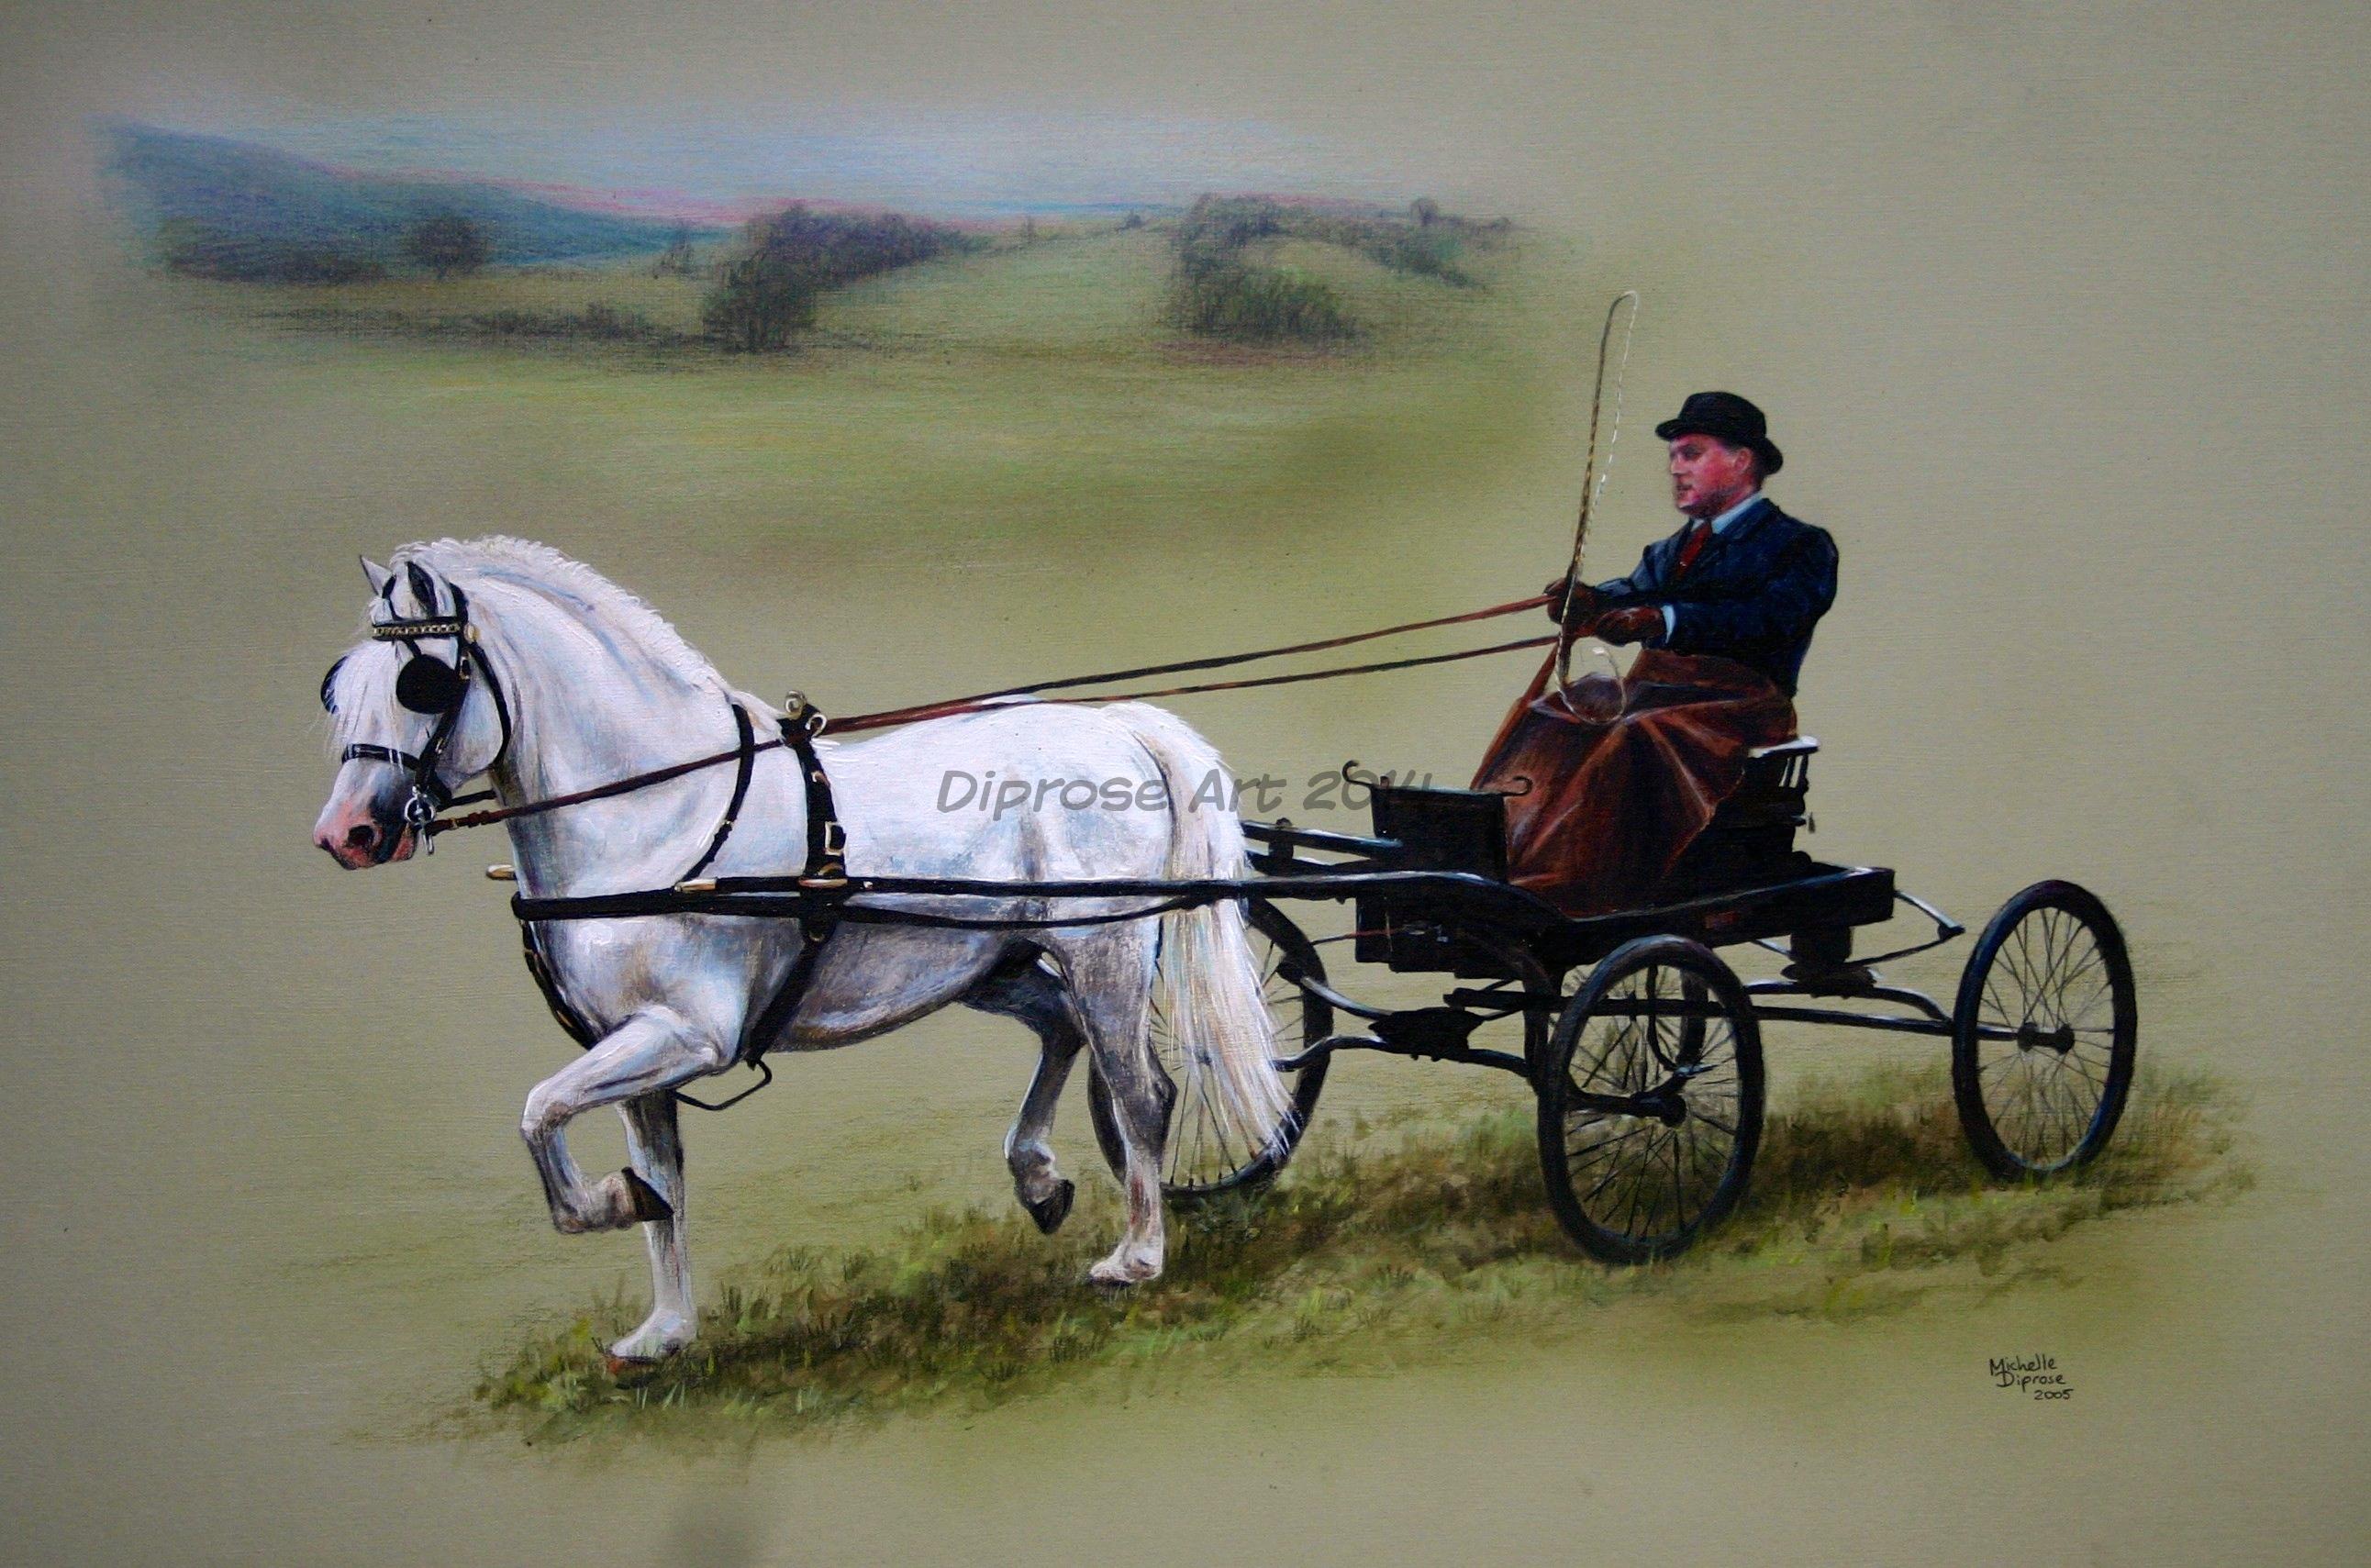 Acrylics on board - approx A3 - horse portrait - Mark is a very skilled driver and won at the Royal Welsh with this bonnie pony.  This Welsh pony was the most flashy and talented I have ever seen.